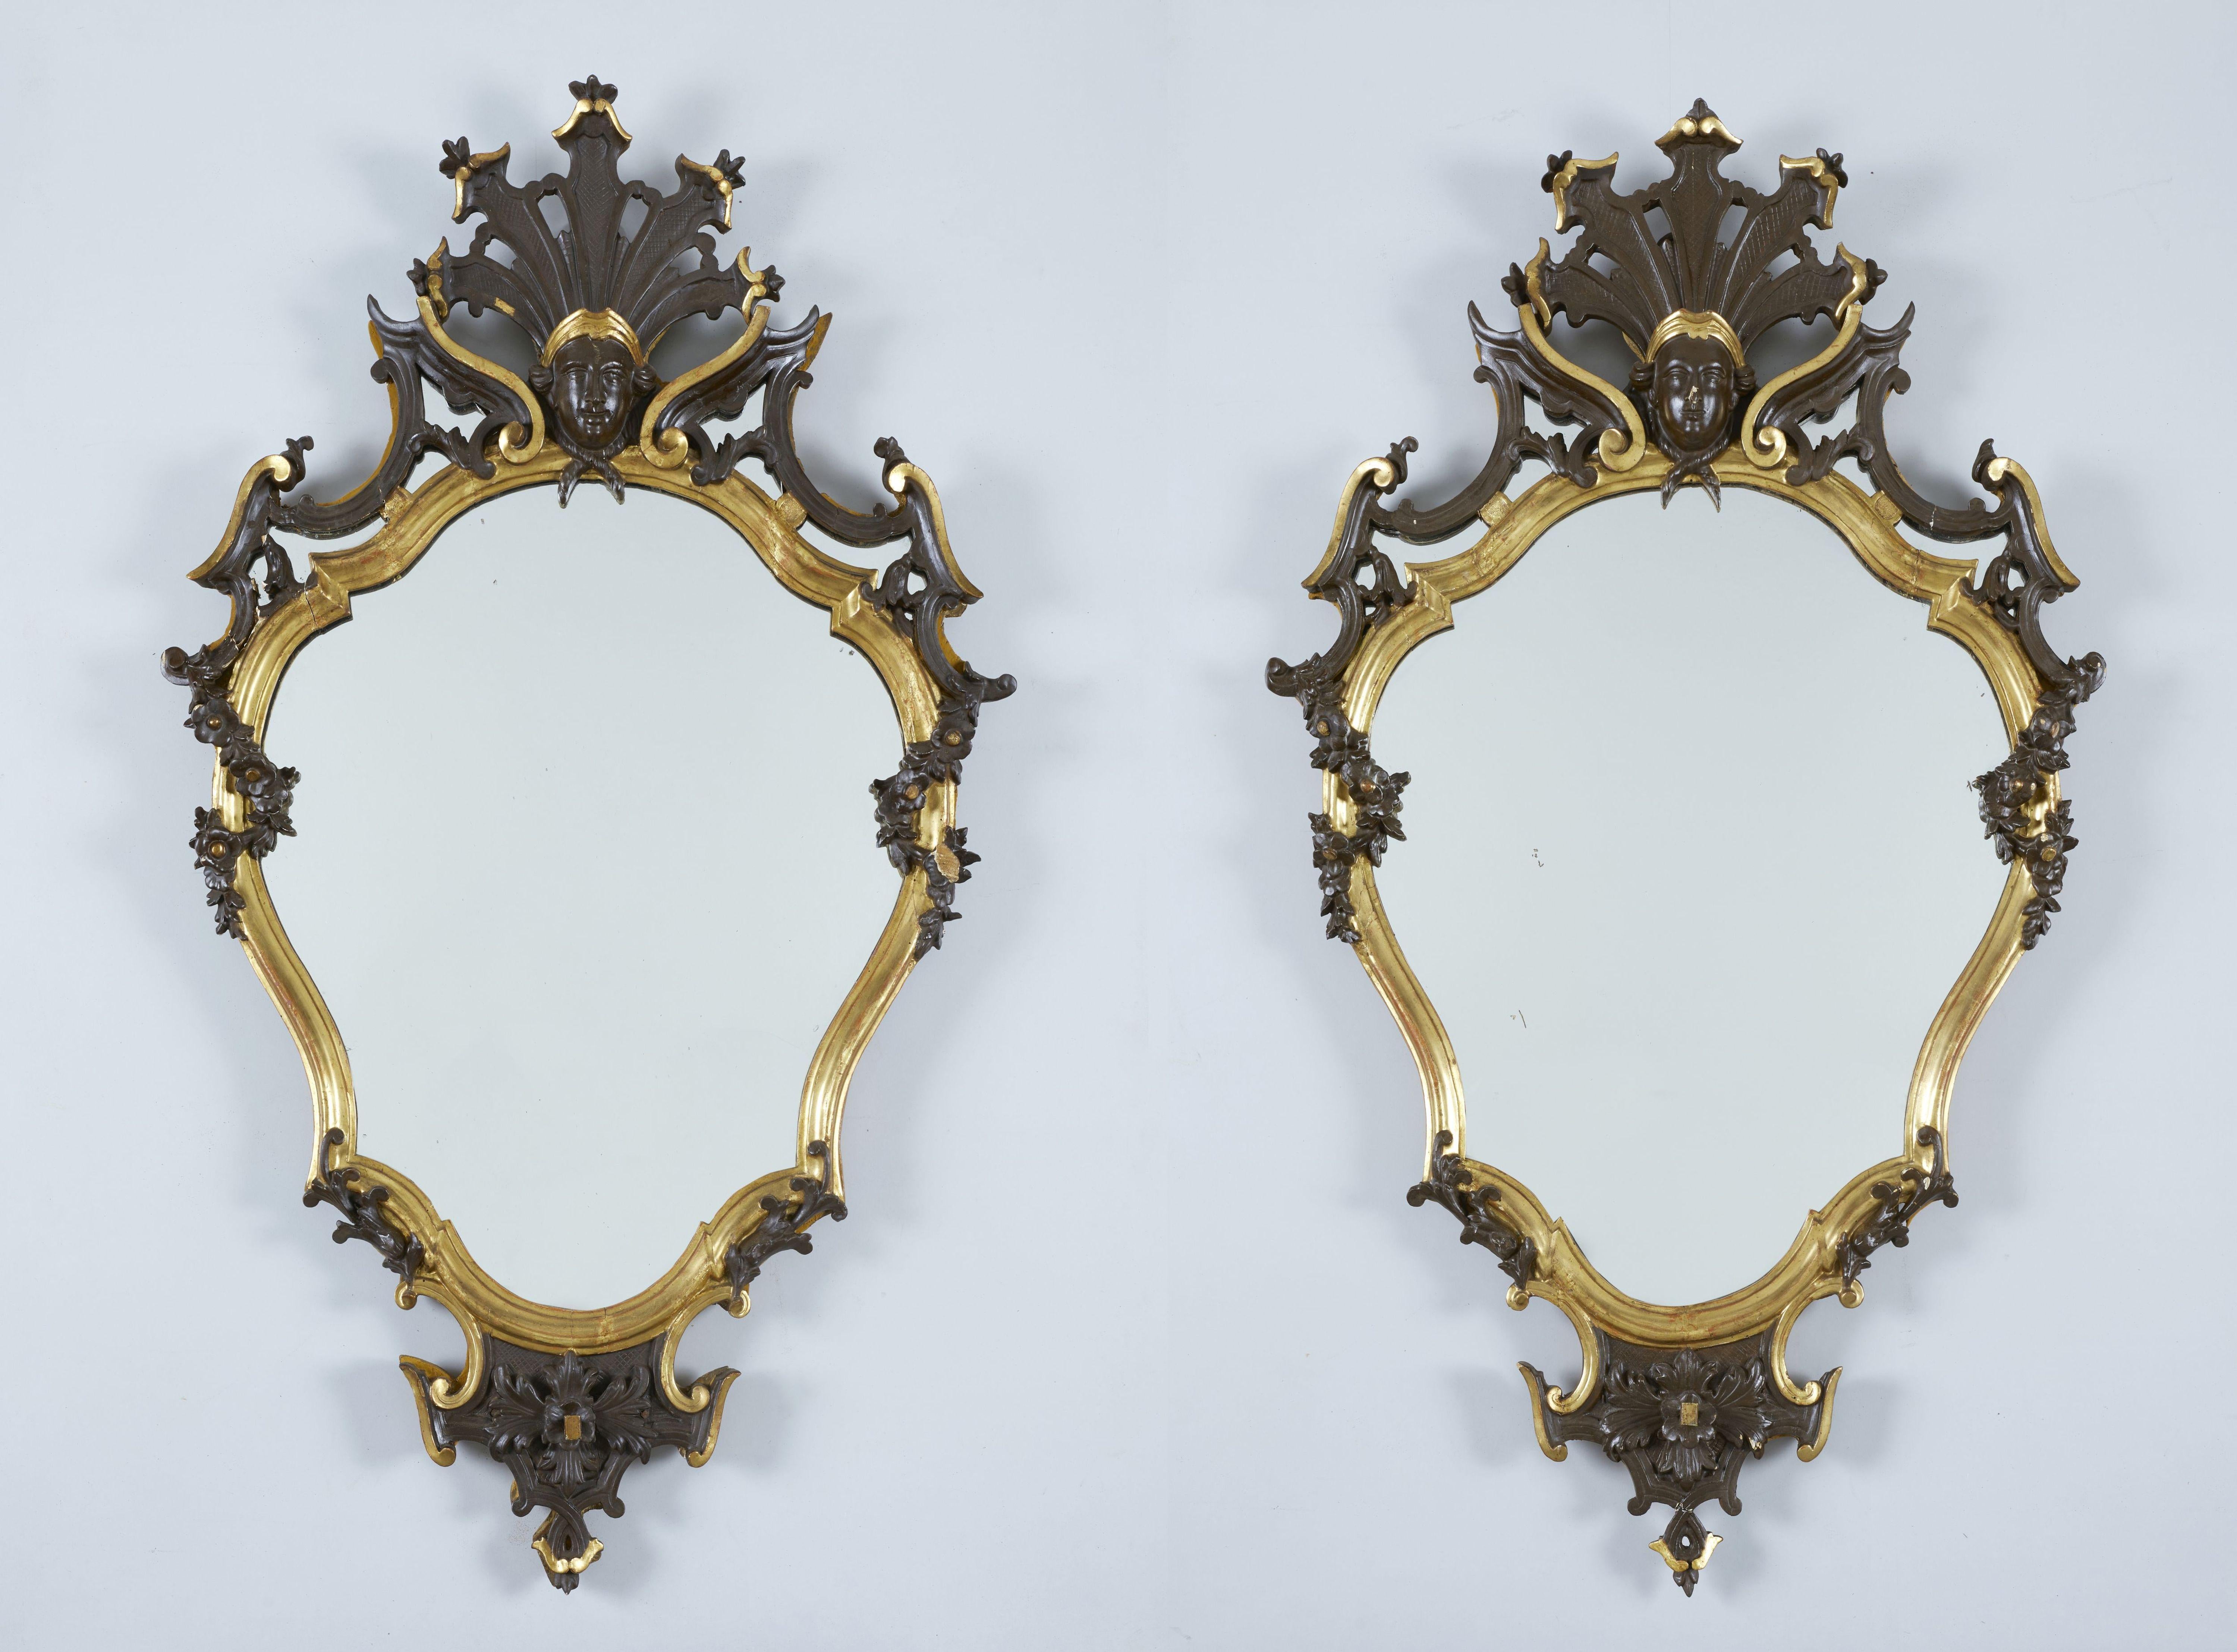 Pair of Lombard Louis XVI mirrors from the second half of the 18th century measuring 116 x 65 cm with original mercury glass.

This marvelous and above all well-sculpted pair of mirrors presents the unmistakable style of Lombard art, delicately